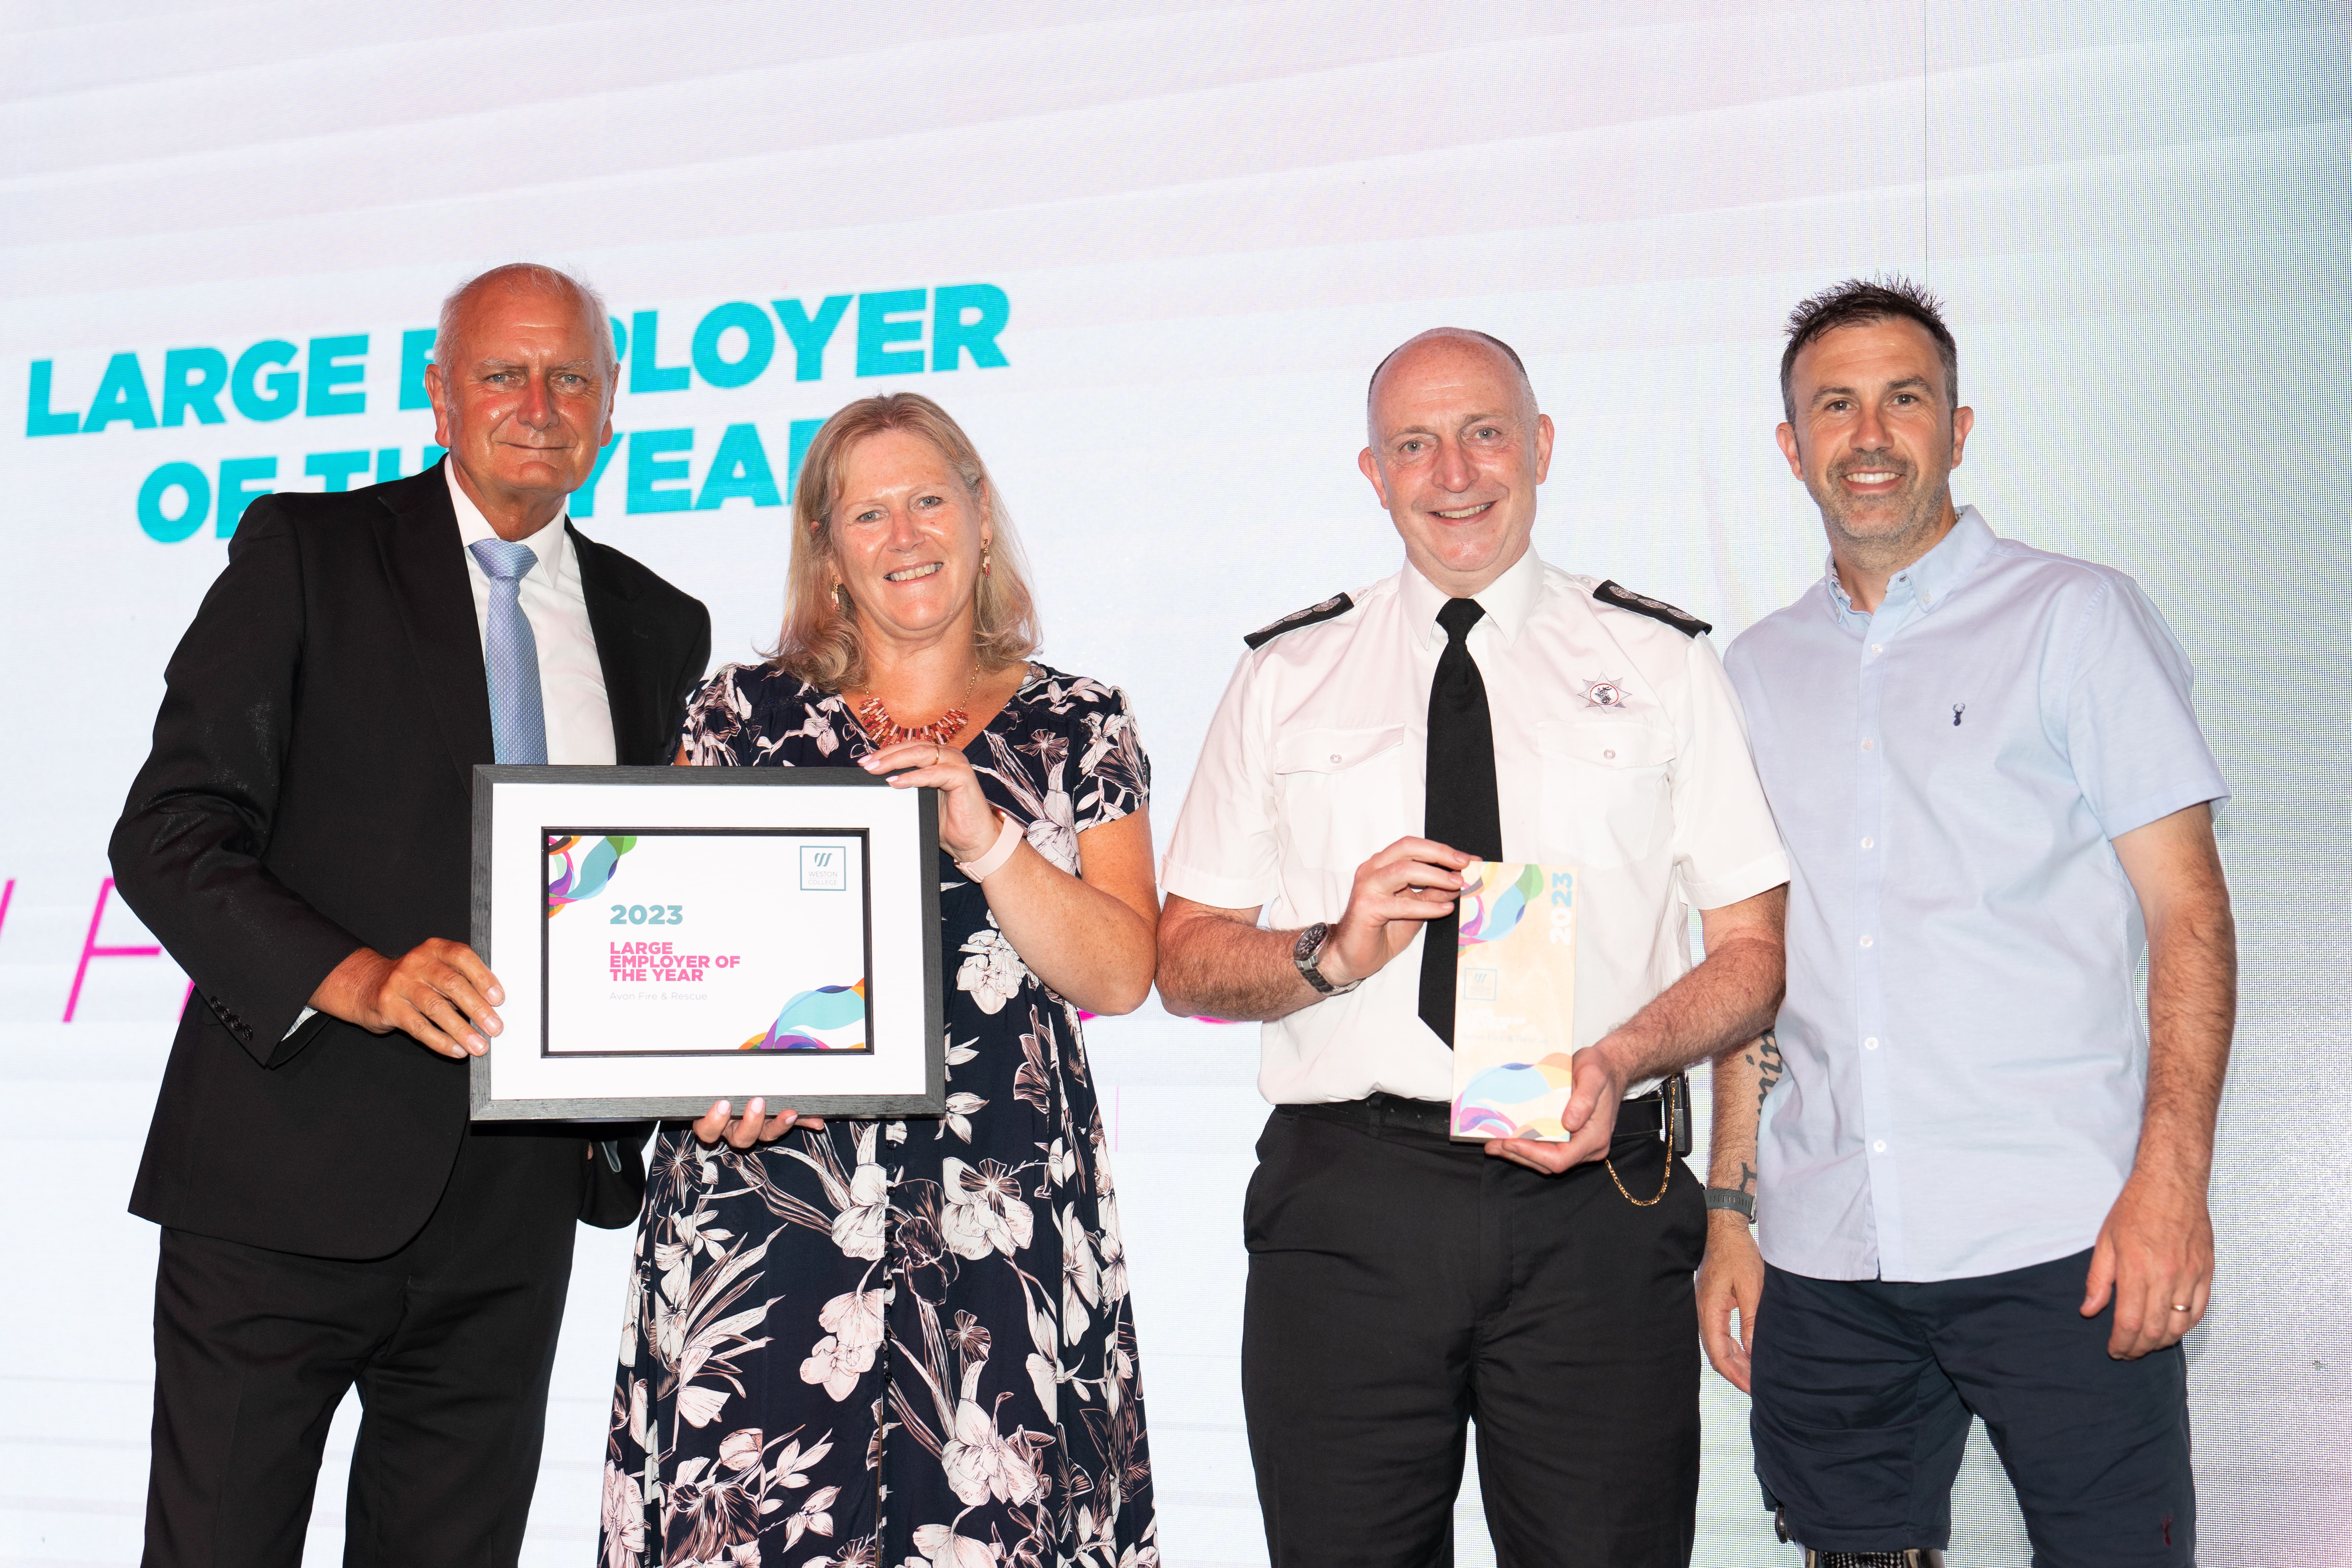 Avon Fire & Rescue, on stage holding thier award next to Andy Lewiss